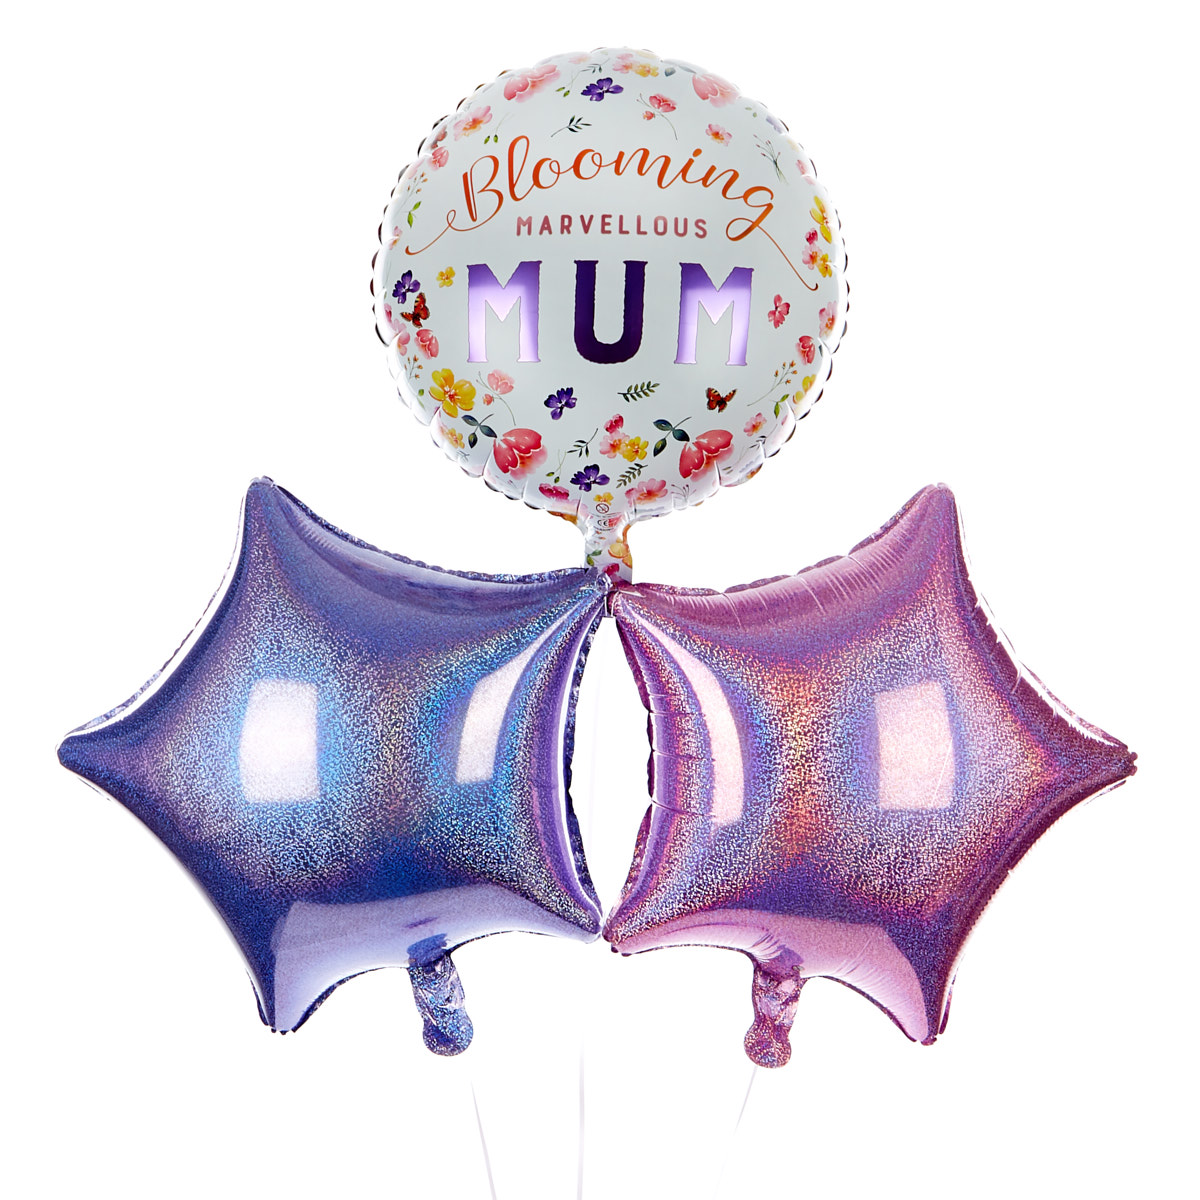 Blooming Marvellous Mum Balloon Bouquet - DELIVERED INFLATED!